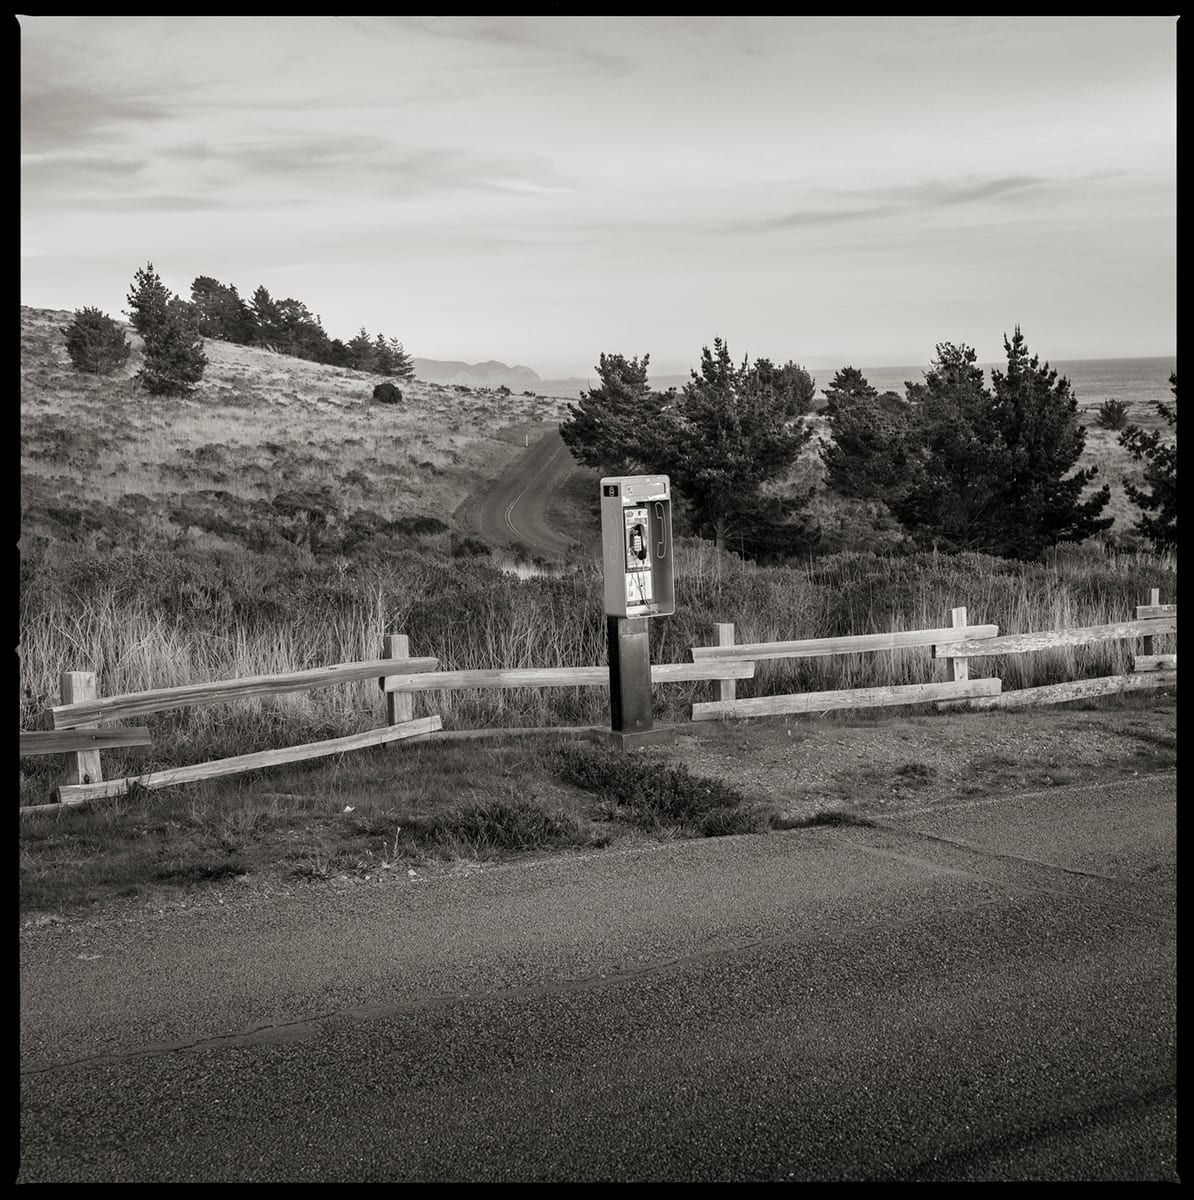 Unknown Number– Point Reyes National Seashore, CA by Eric T. Kunsman  Image: ID: A black and white image shows a payphone in front of a wooden fence.  Behind the fence is a grassy hill with trees.